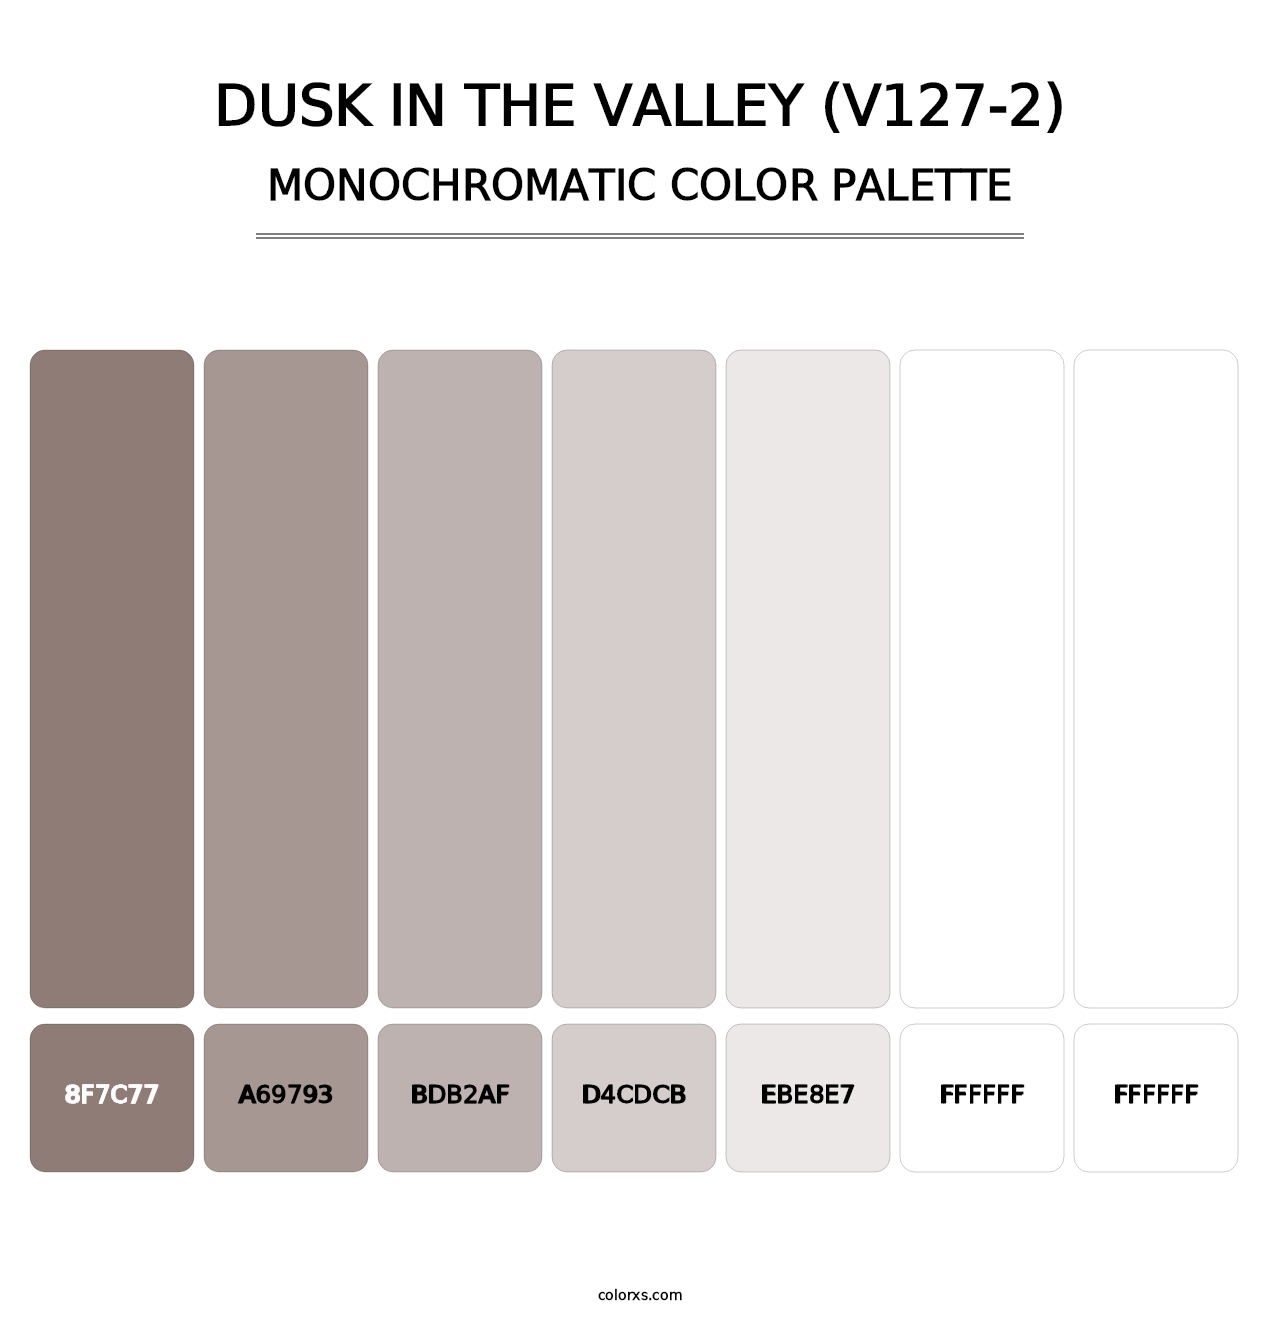 Dusk in the Valley (V127-2) - Monochromatic Color Palette